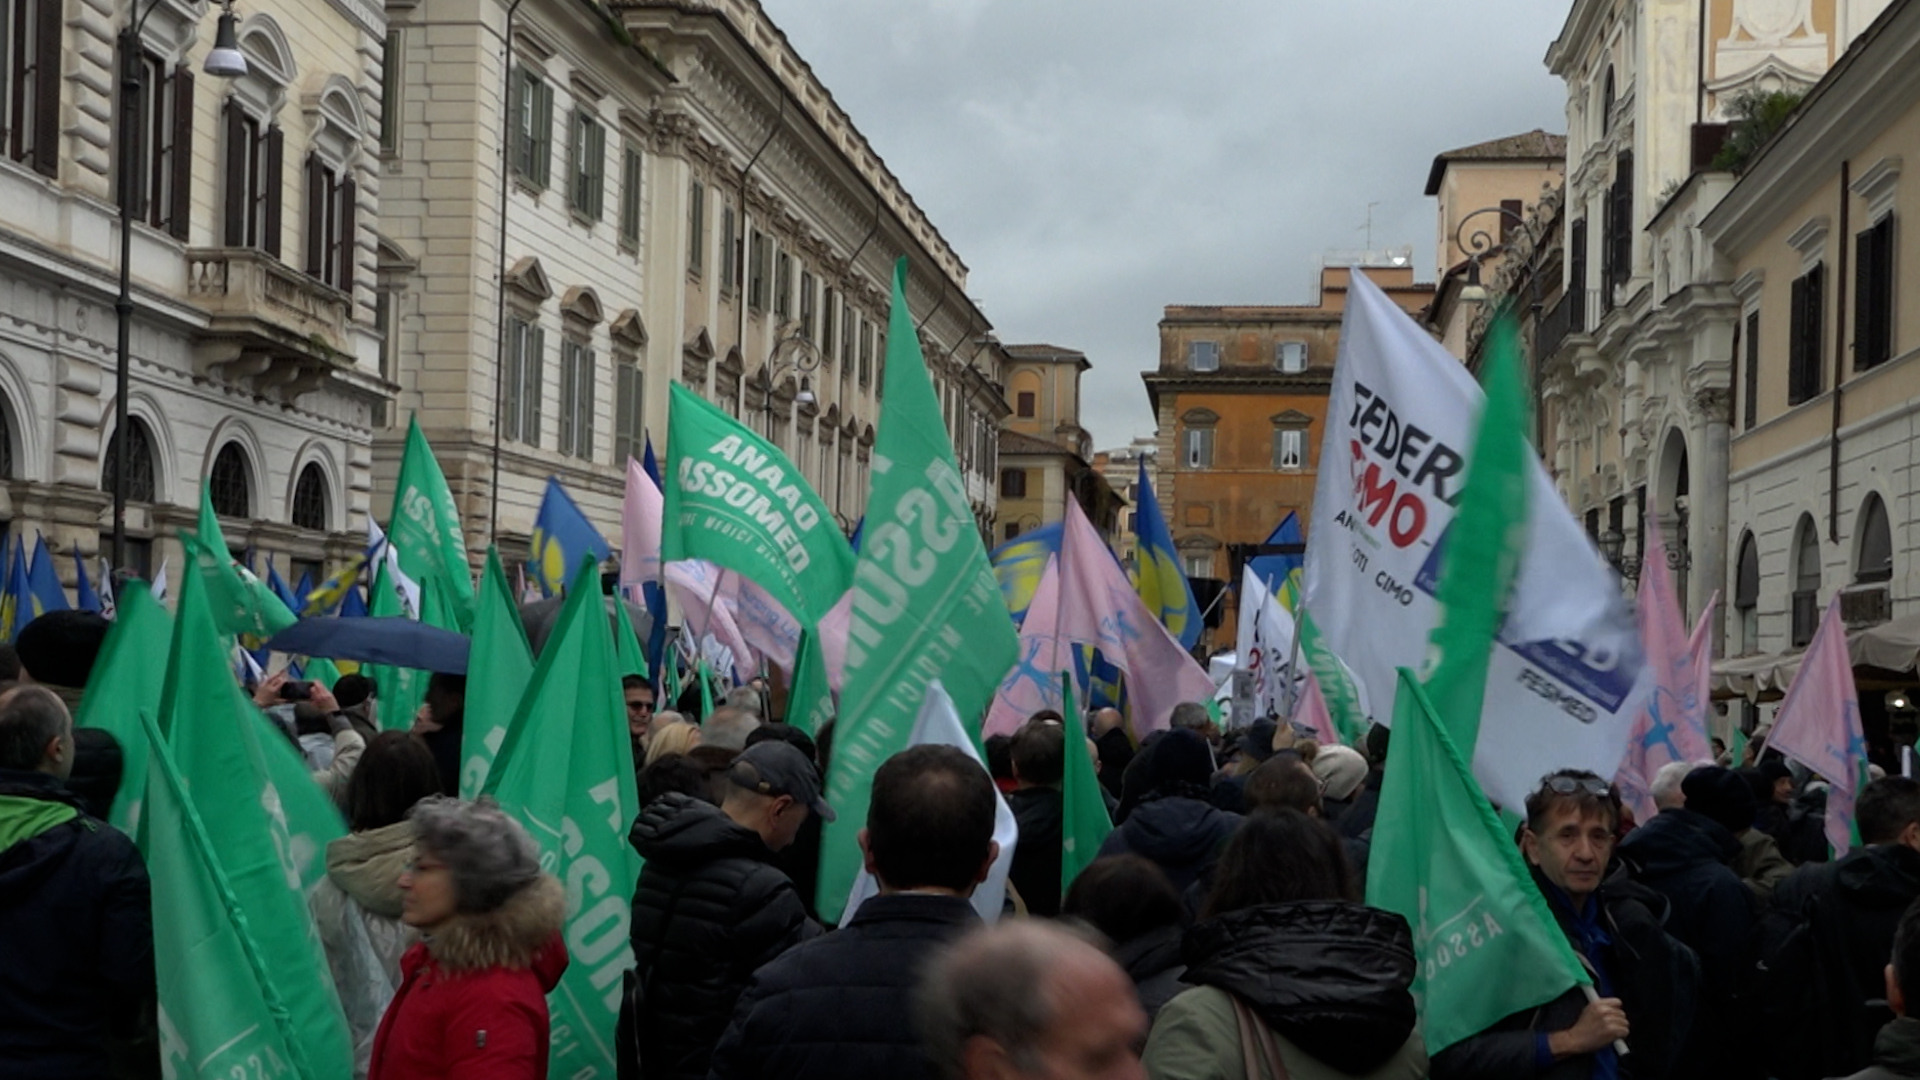 Health workers braved the rain to protest in central Rome on Tuesday. /Giles Gibson/CGTN Europe